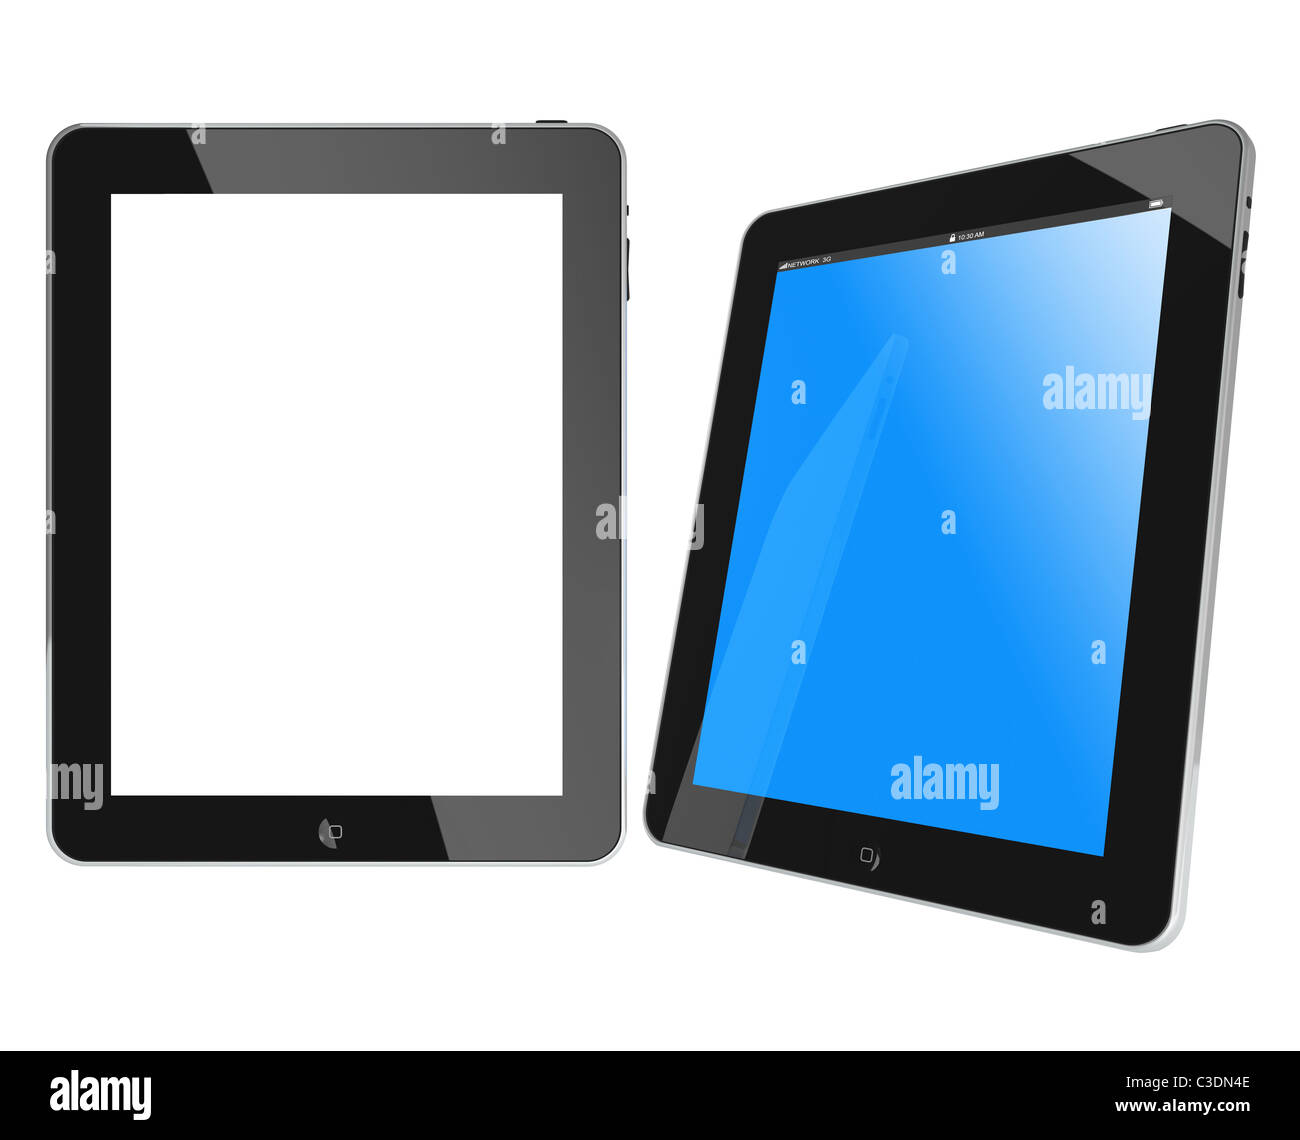 New iPad portable computer tablet glossy black and chromed, blue screen, isolated on white with reflection Stock Photo - Alamy